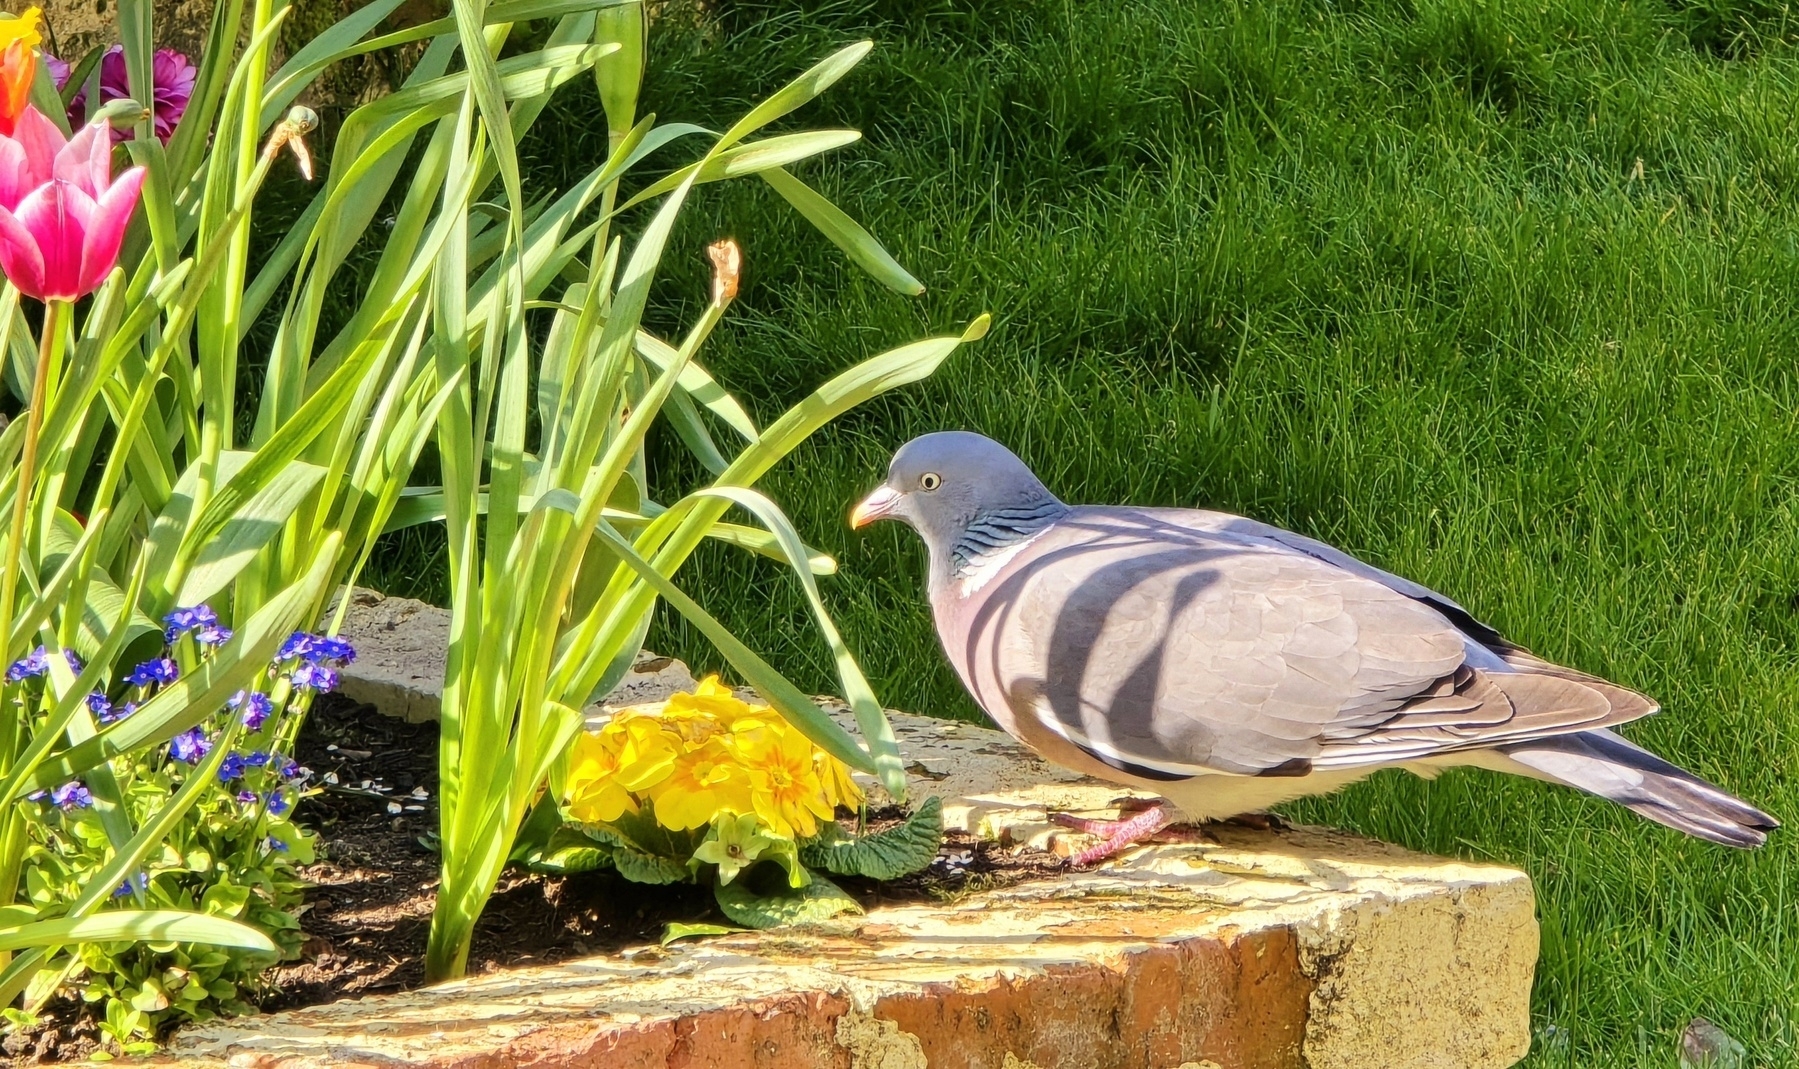 Wood pigeon feeding on a bed full of flowers